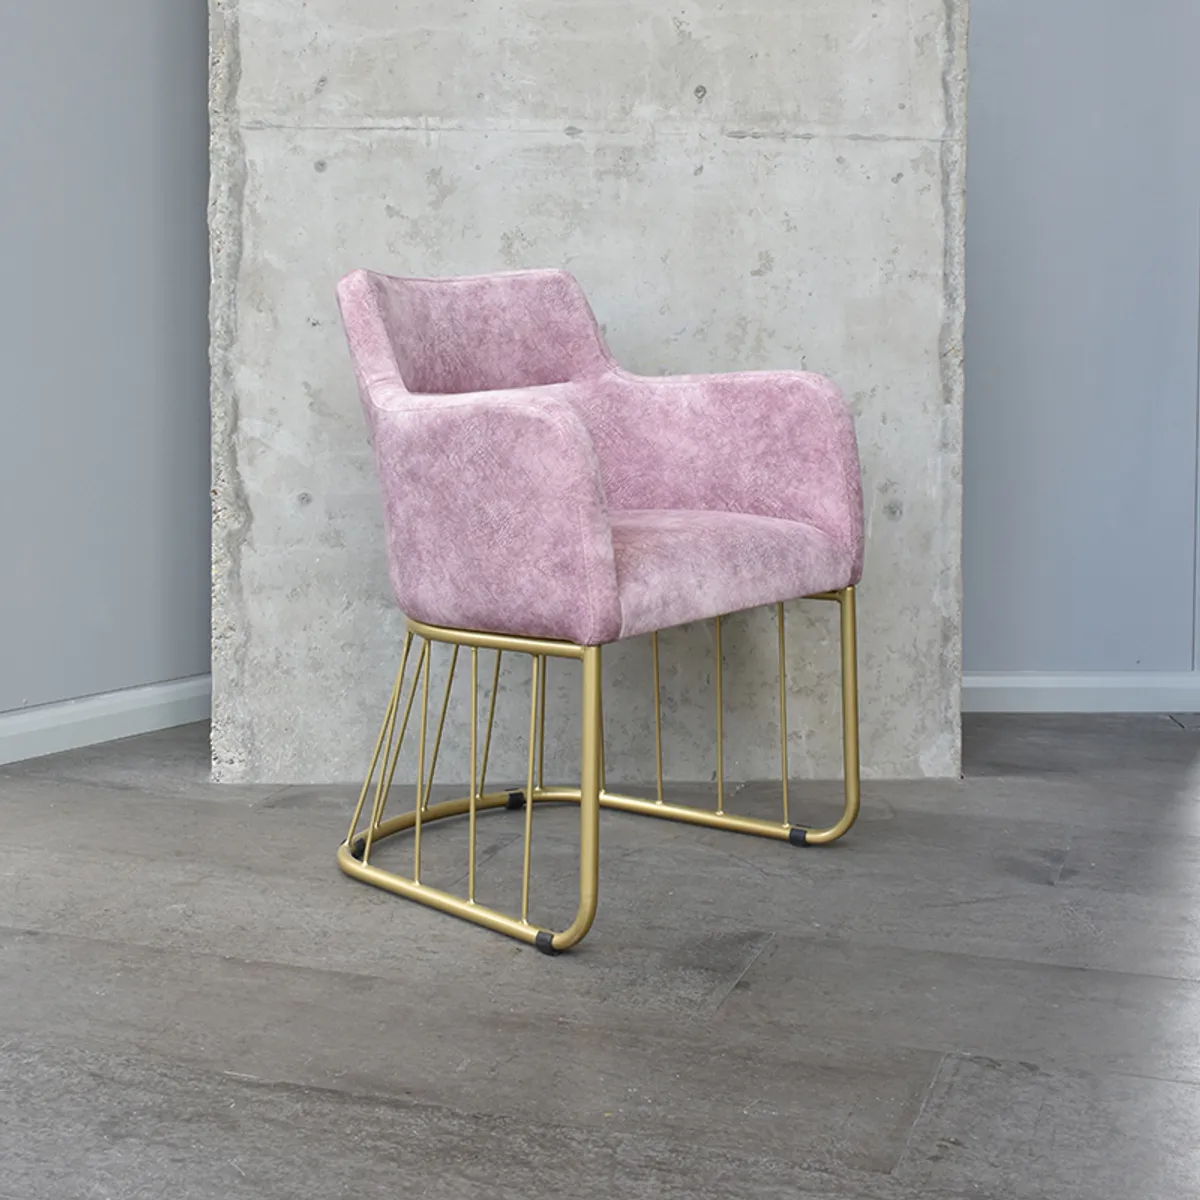 Luxy Armchair Showroom Sample Inside Out Contracts 2